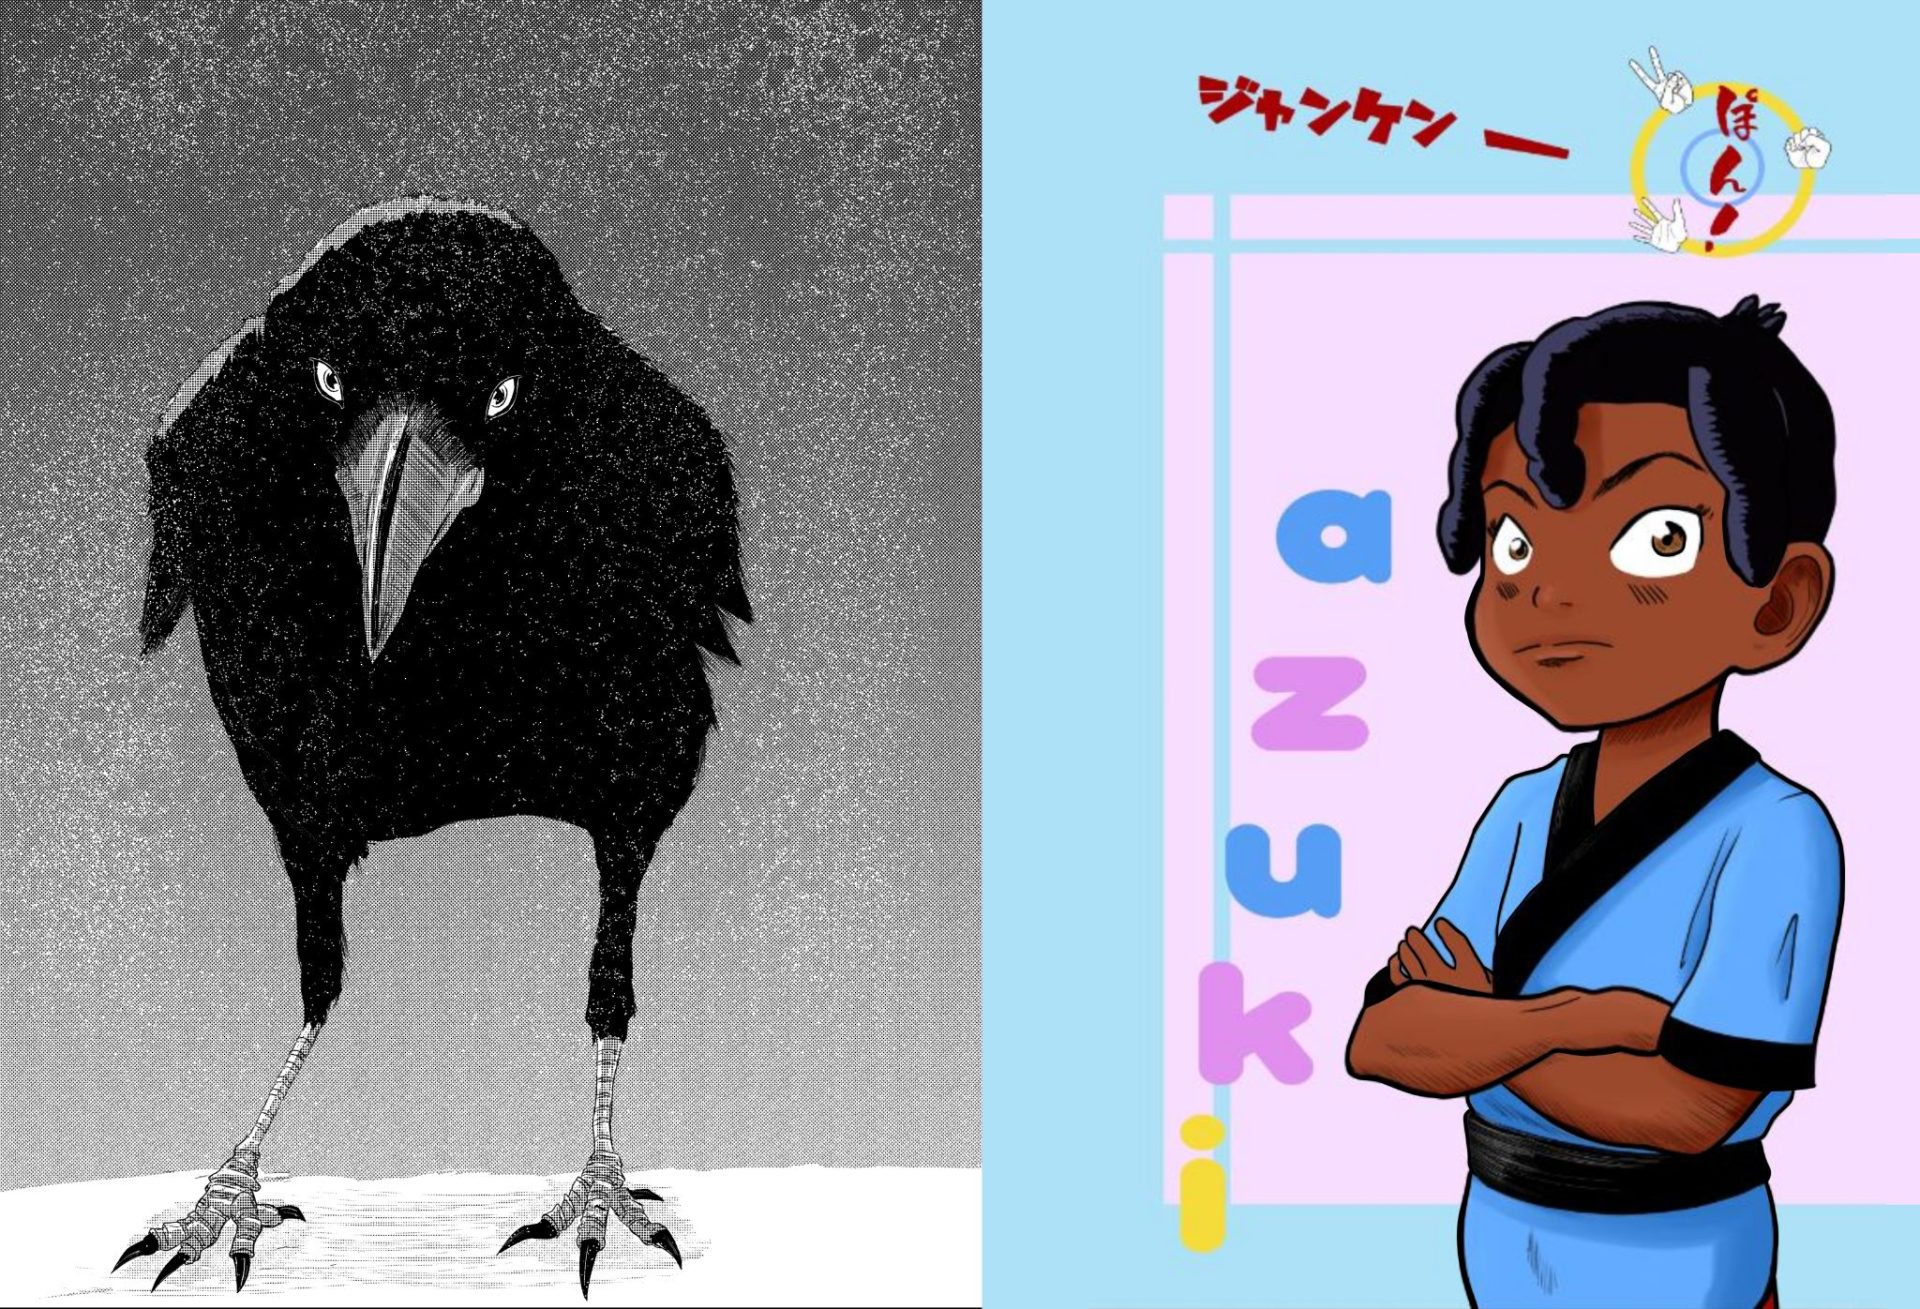 Two images from two different managa by Kofi Bazzell-Smith. On the left, a black and white drawing of a crow. The crow is black, the background gray, and the ground on which the crow stands is white. On the right a character named Azuki. Azuki is a black child with brown skin and black hair. They wear a blue outfit. The background is light blue and pink. There is Japanese writing above the character's head, and the name Azuki spelled out vertically in bubble letters to the left.